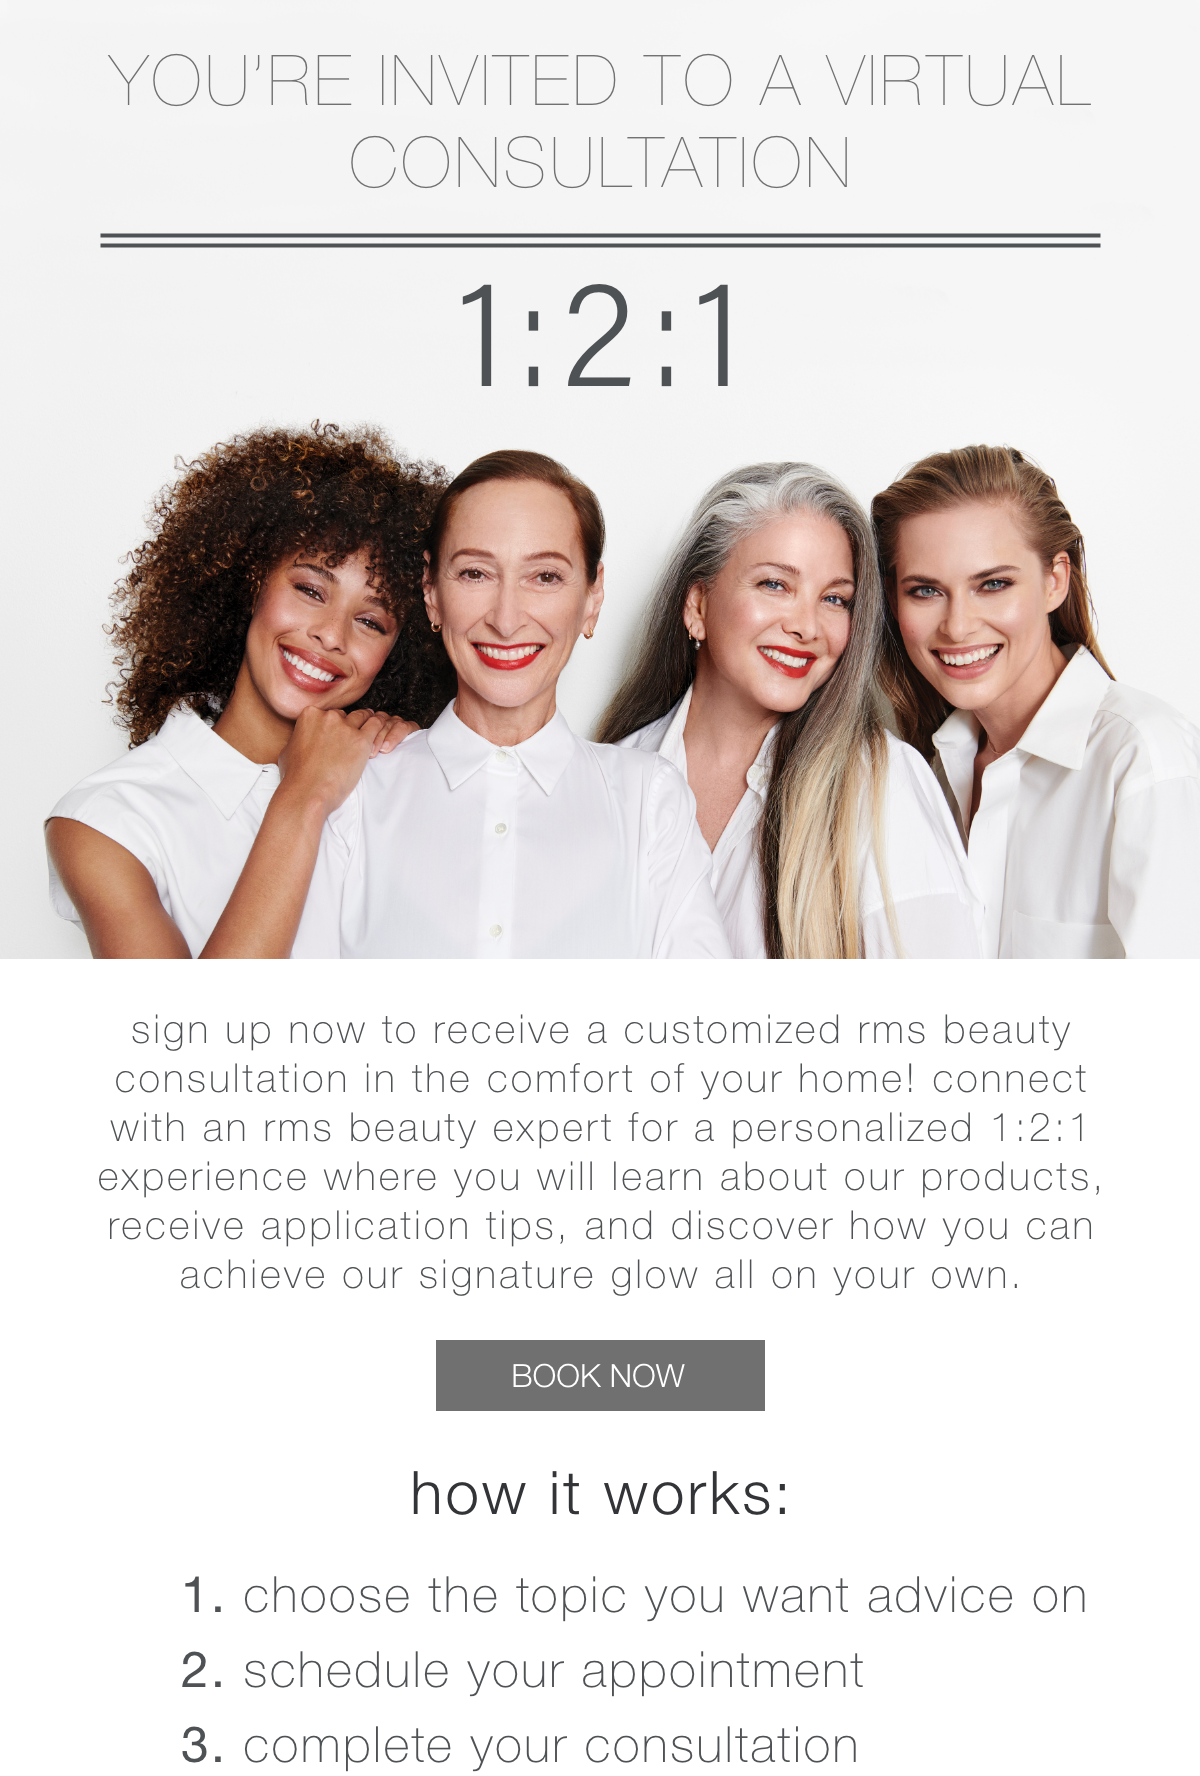 Sign up now to receive a customized RMS Beauty consultation in the comfort of your home! Connect with an RMS Beauty expert for a personalized 1:2:1 experience where you will learn about our products, receive application tips, and discover how you can achieve our signature glow all on your own.